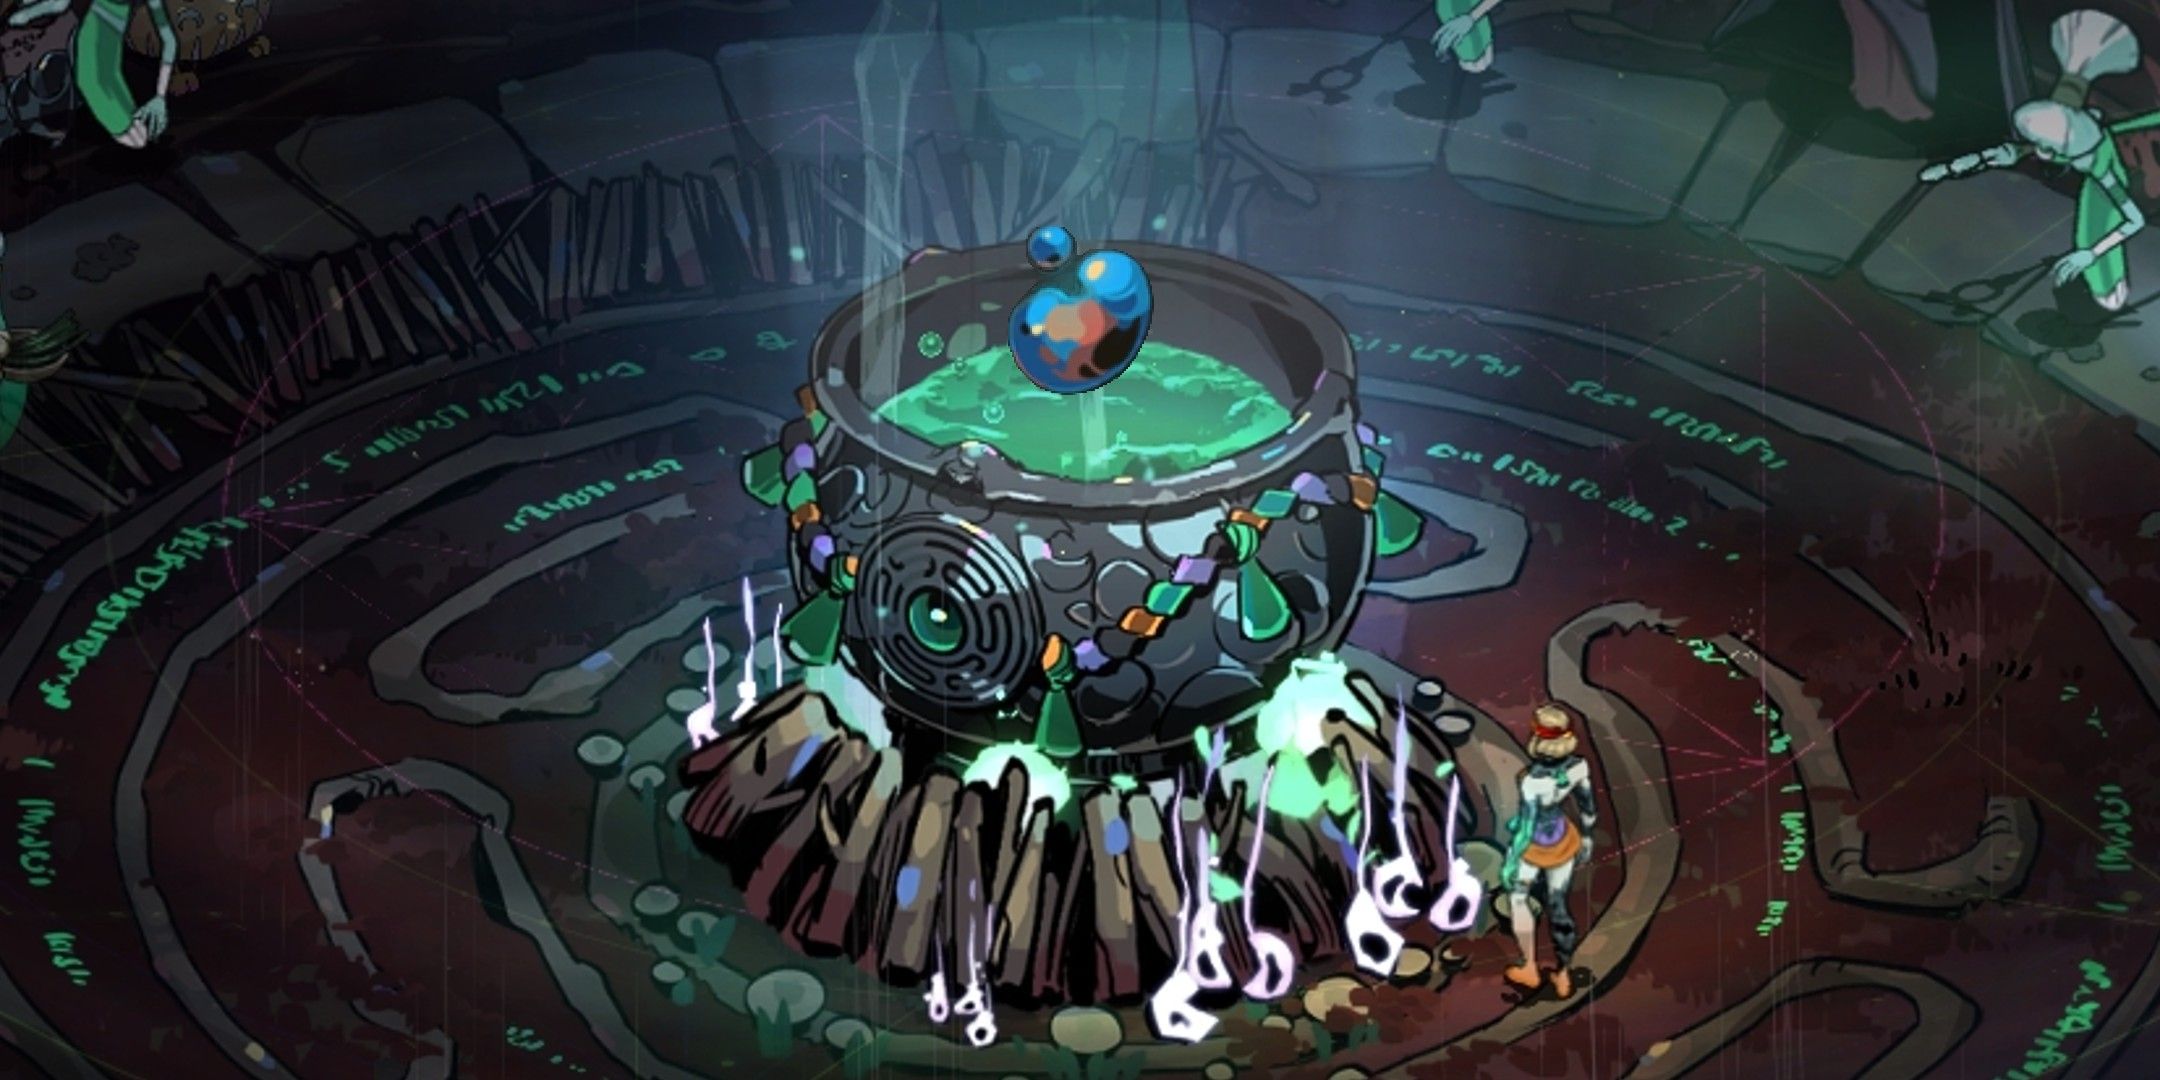 Tears hovering above a cauldron in Hades 2